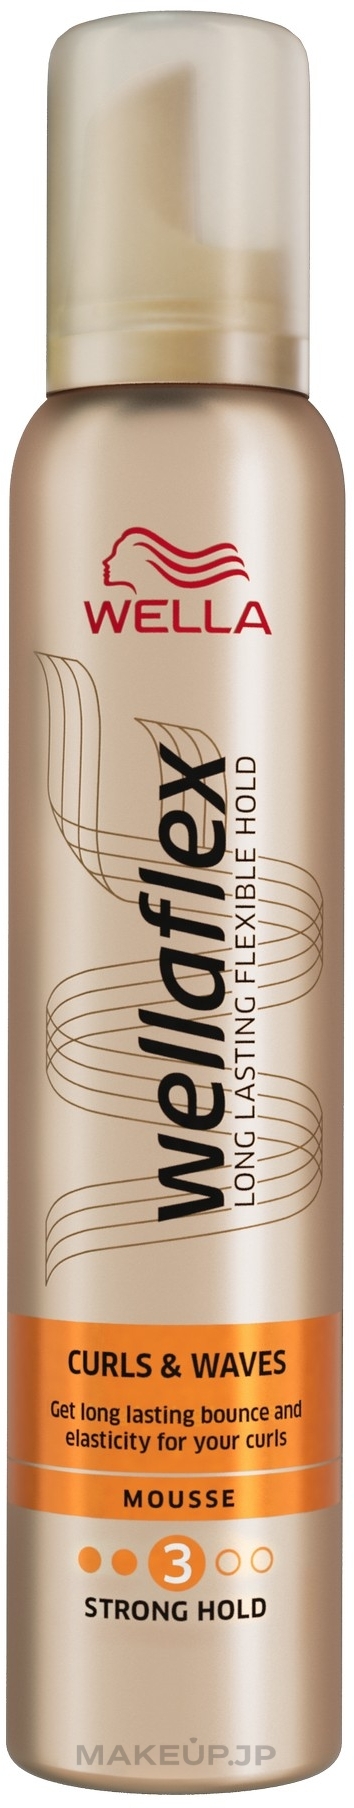 Strong Hold Styling Hair Mousse "Curls & Waves" - Wella Wellaflex — photo 200 ml